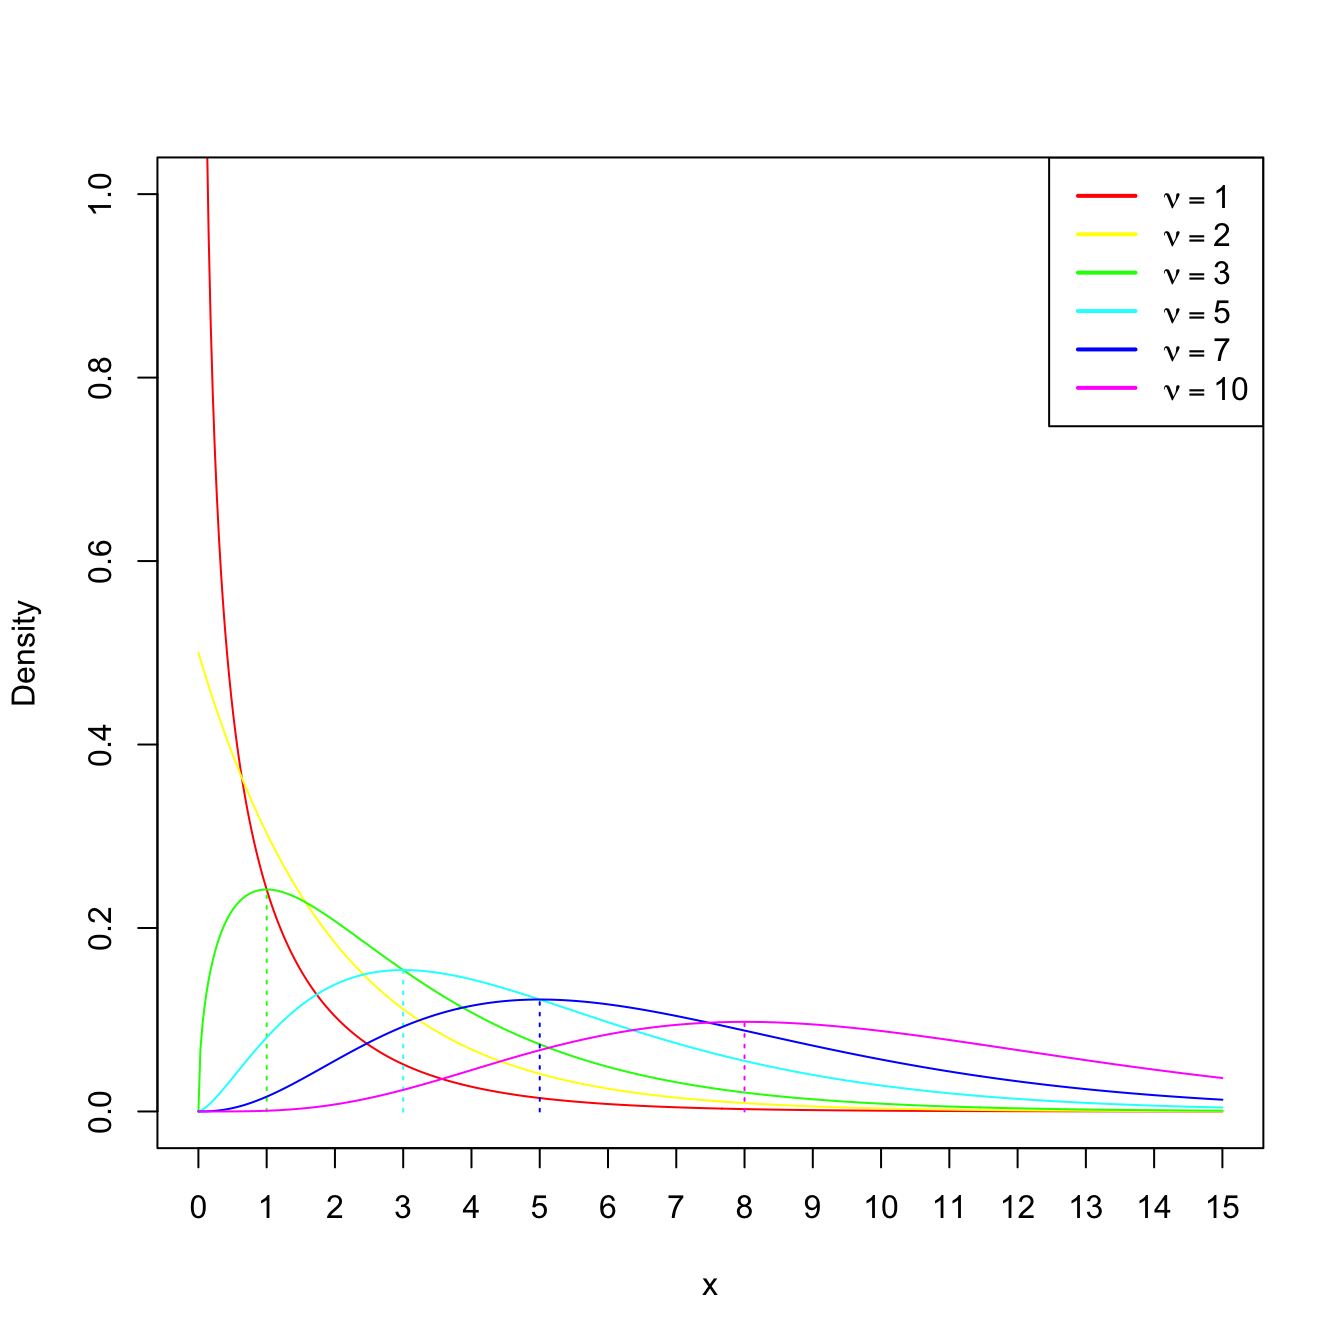 \(\chi^2_\nu\) densities for several degrees of freedom \(\nu.\) The dotted lines represent the unique modes of the densities.